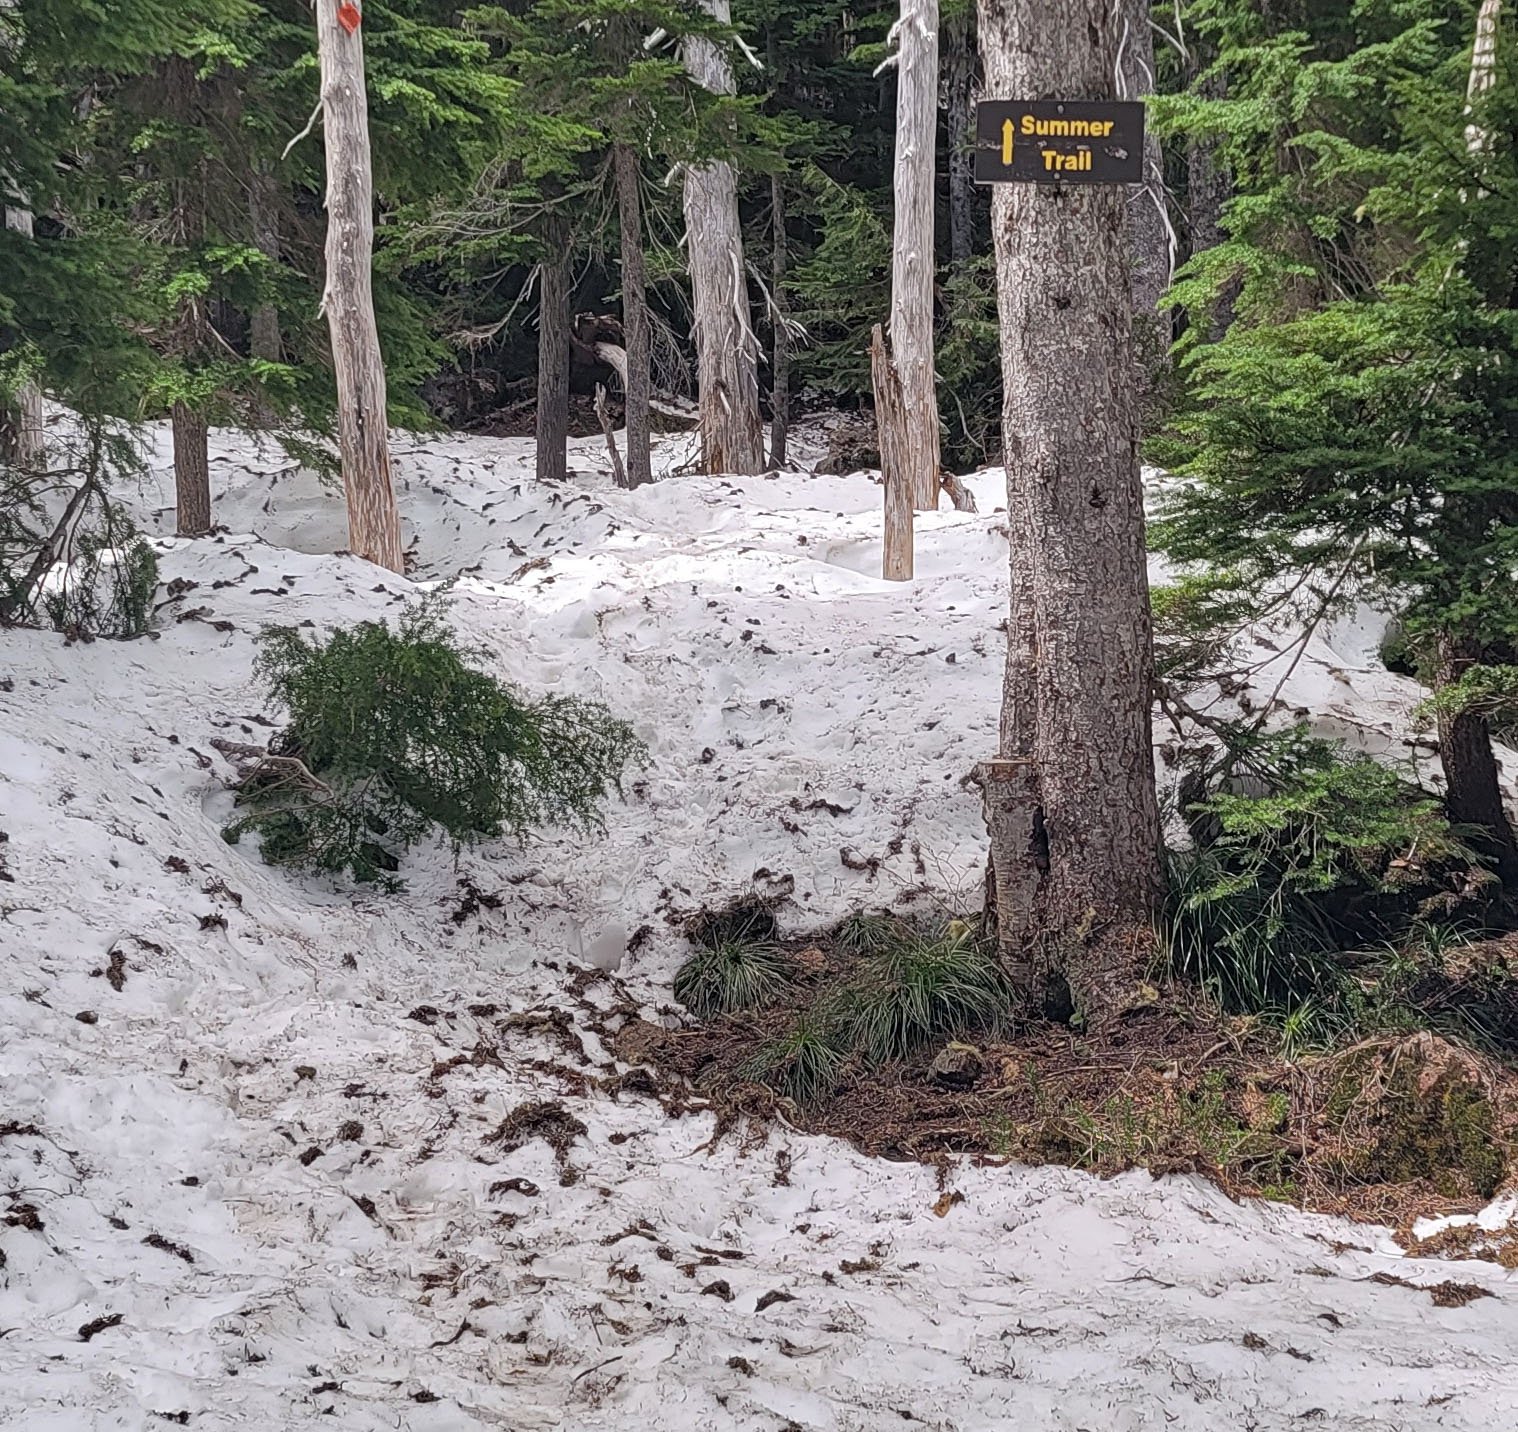  I just wandered around until I stumbled onto the Mt Eleanor trail. So I tried to make it to the top of that one instead. Sadly the last mile of the trail was snow.  Btw if this is the “summer trail” mid-June, what’s the winter trail like? 